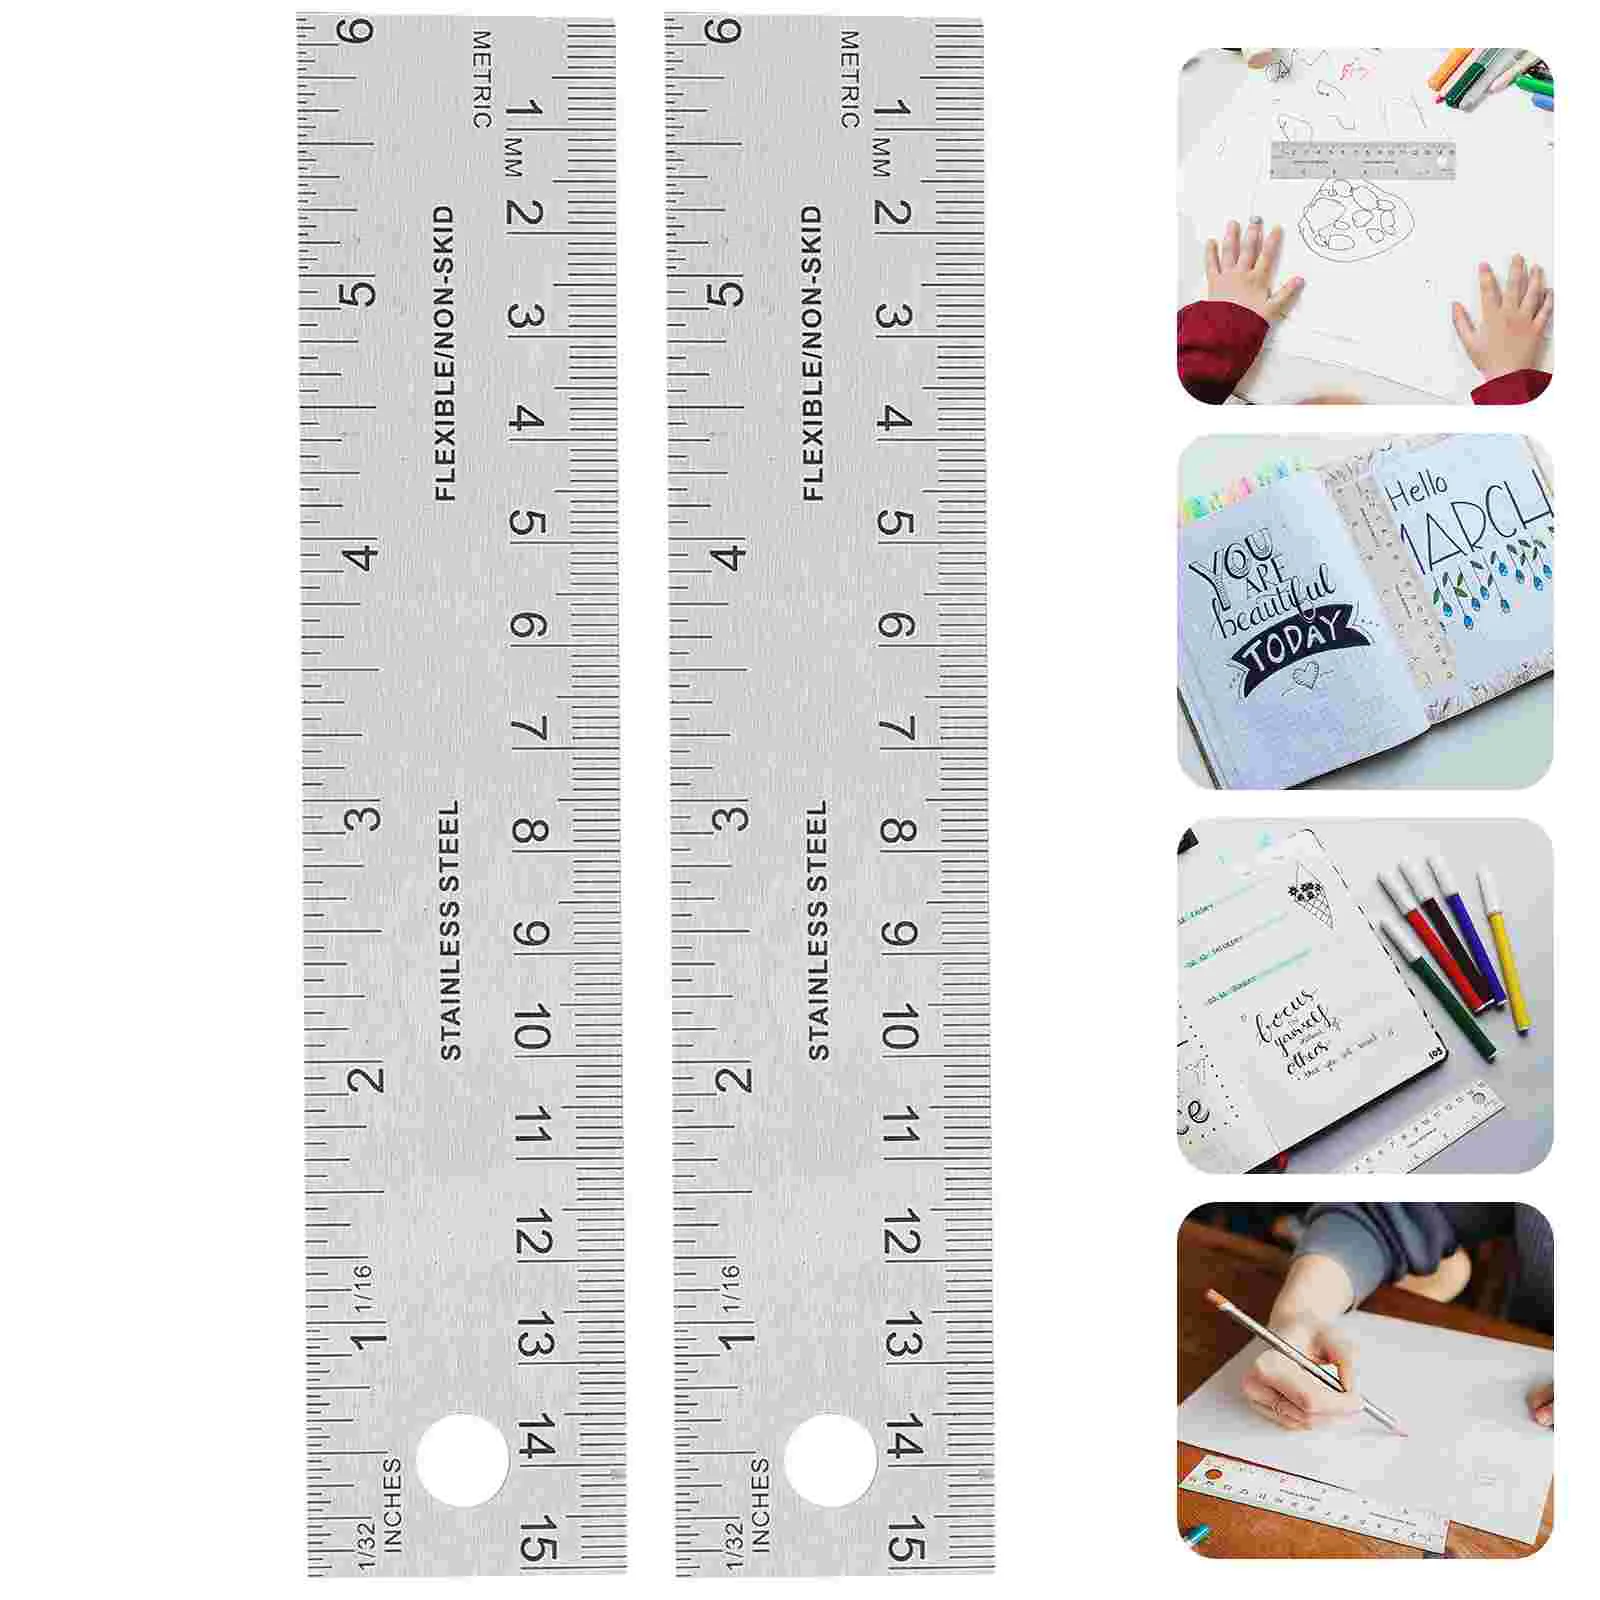 

2 Pcs Cork Stainless Steel Ruler Back Straight Edges Rulers Corked Engineering Carpenter Wooden Scale Office Metric